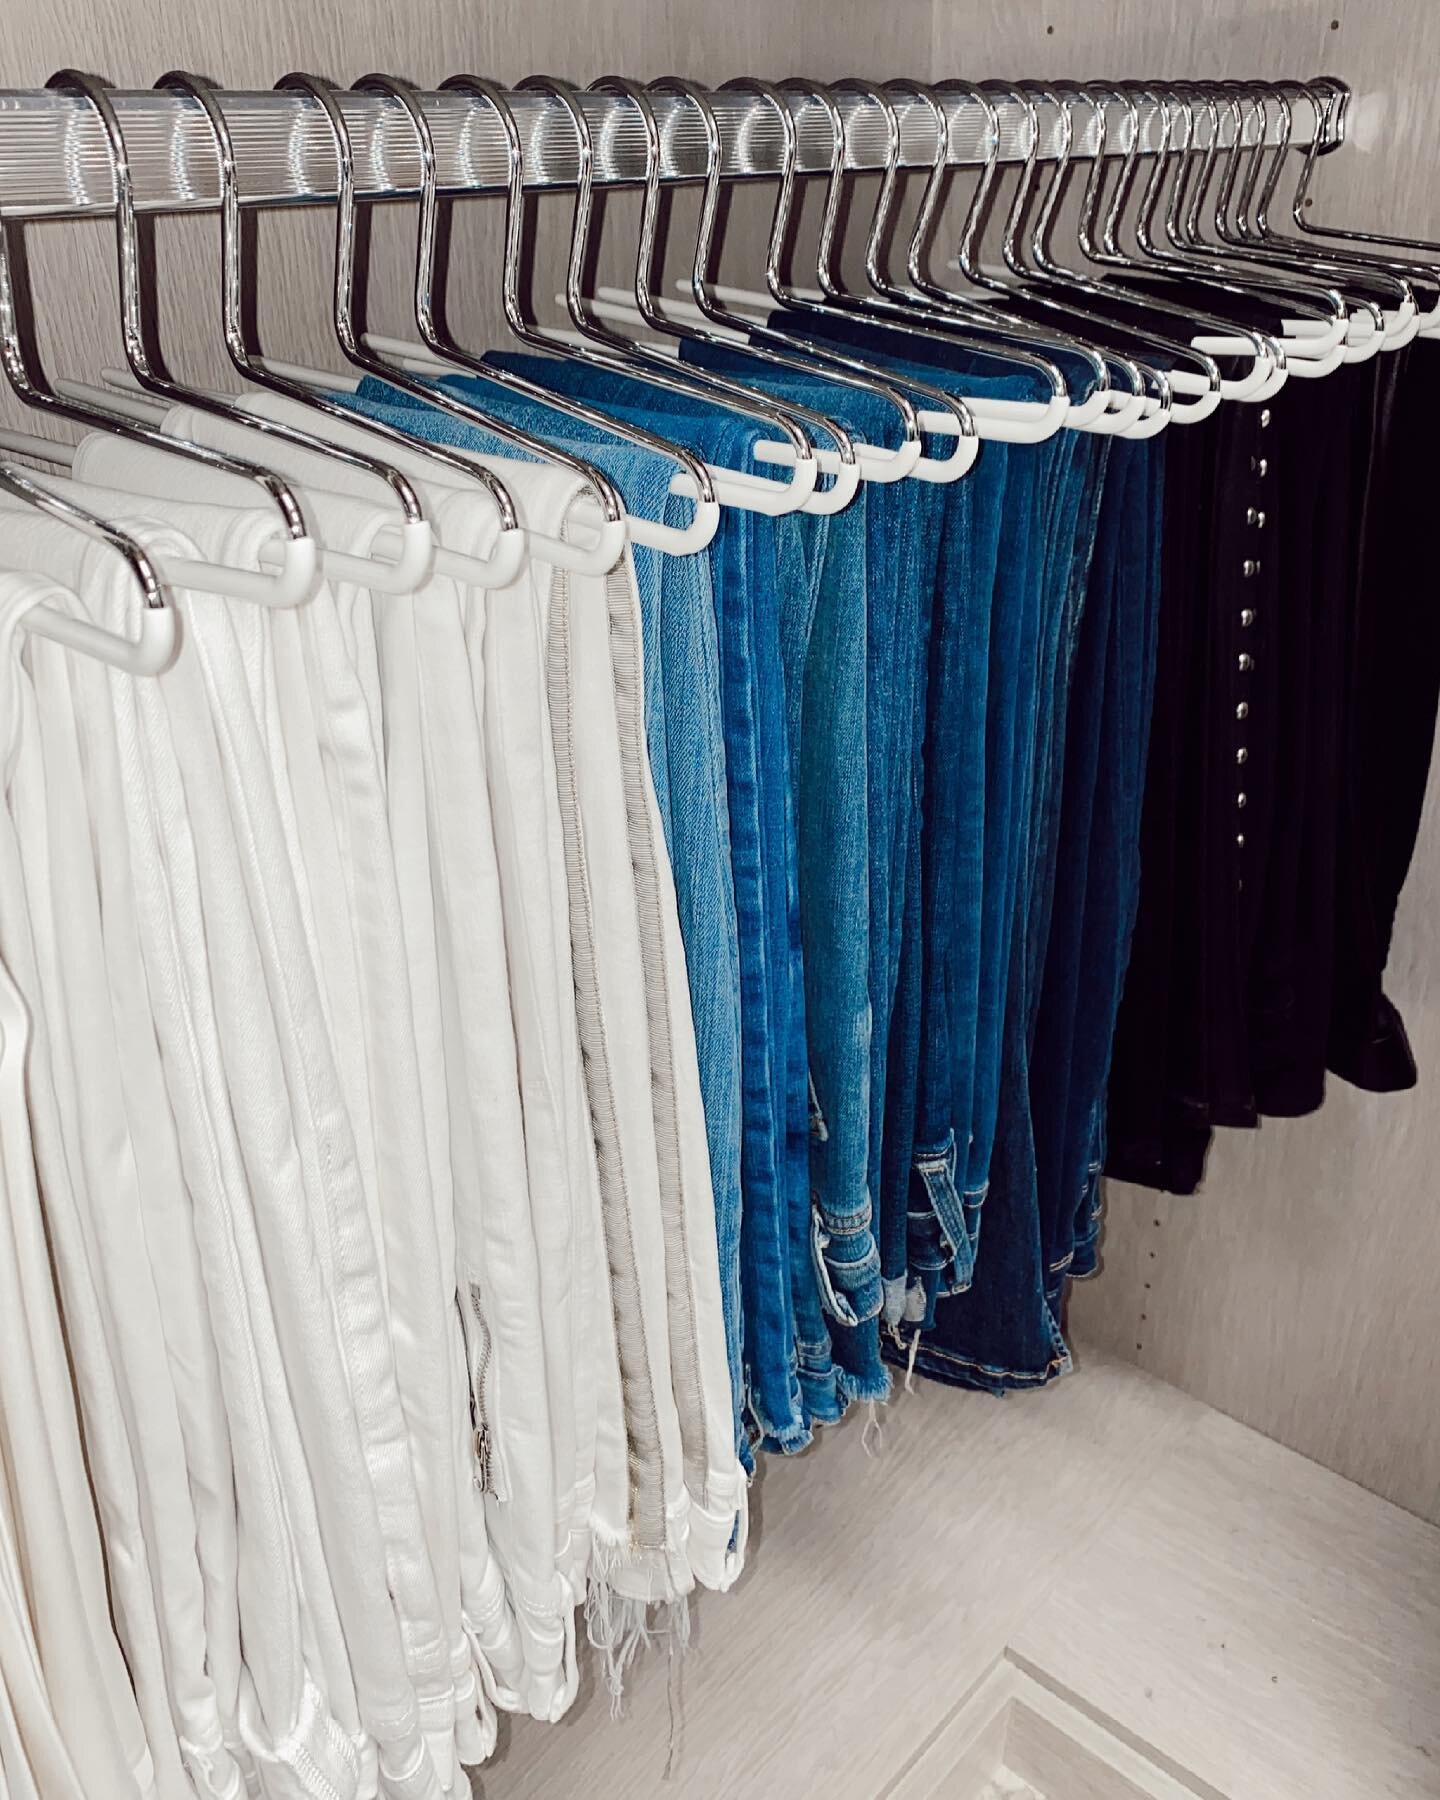 Today&rsquo;s Tip: Flip pant hangers backwards to achieve a streamlined look #organizeandstyle